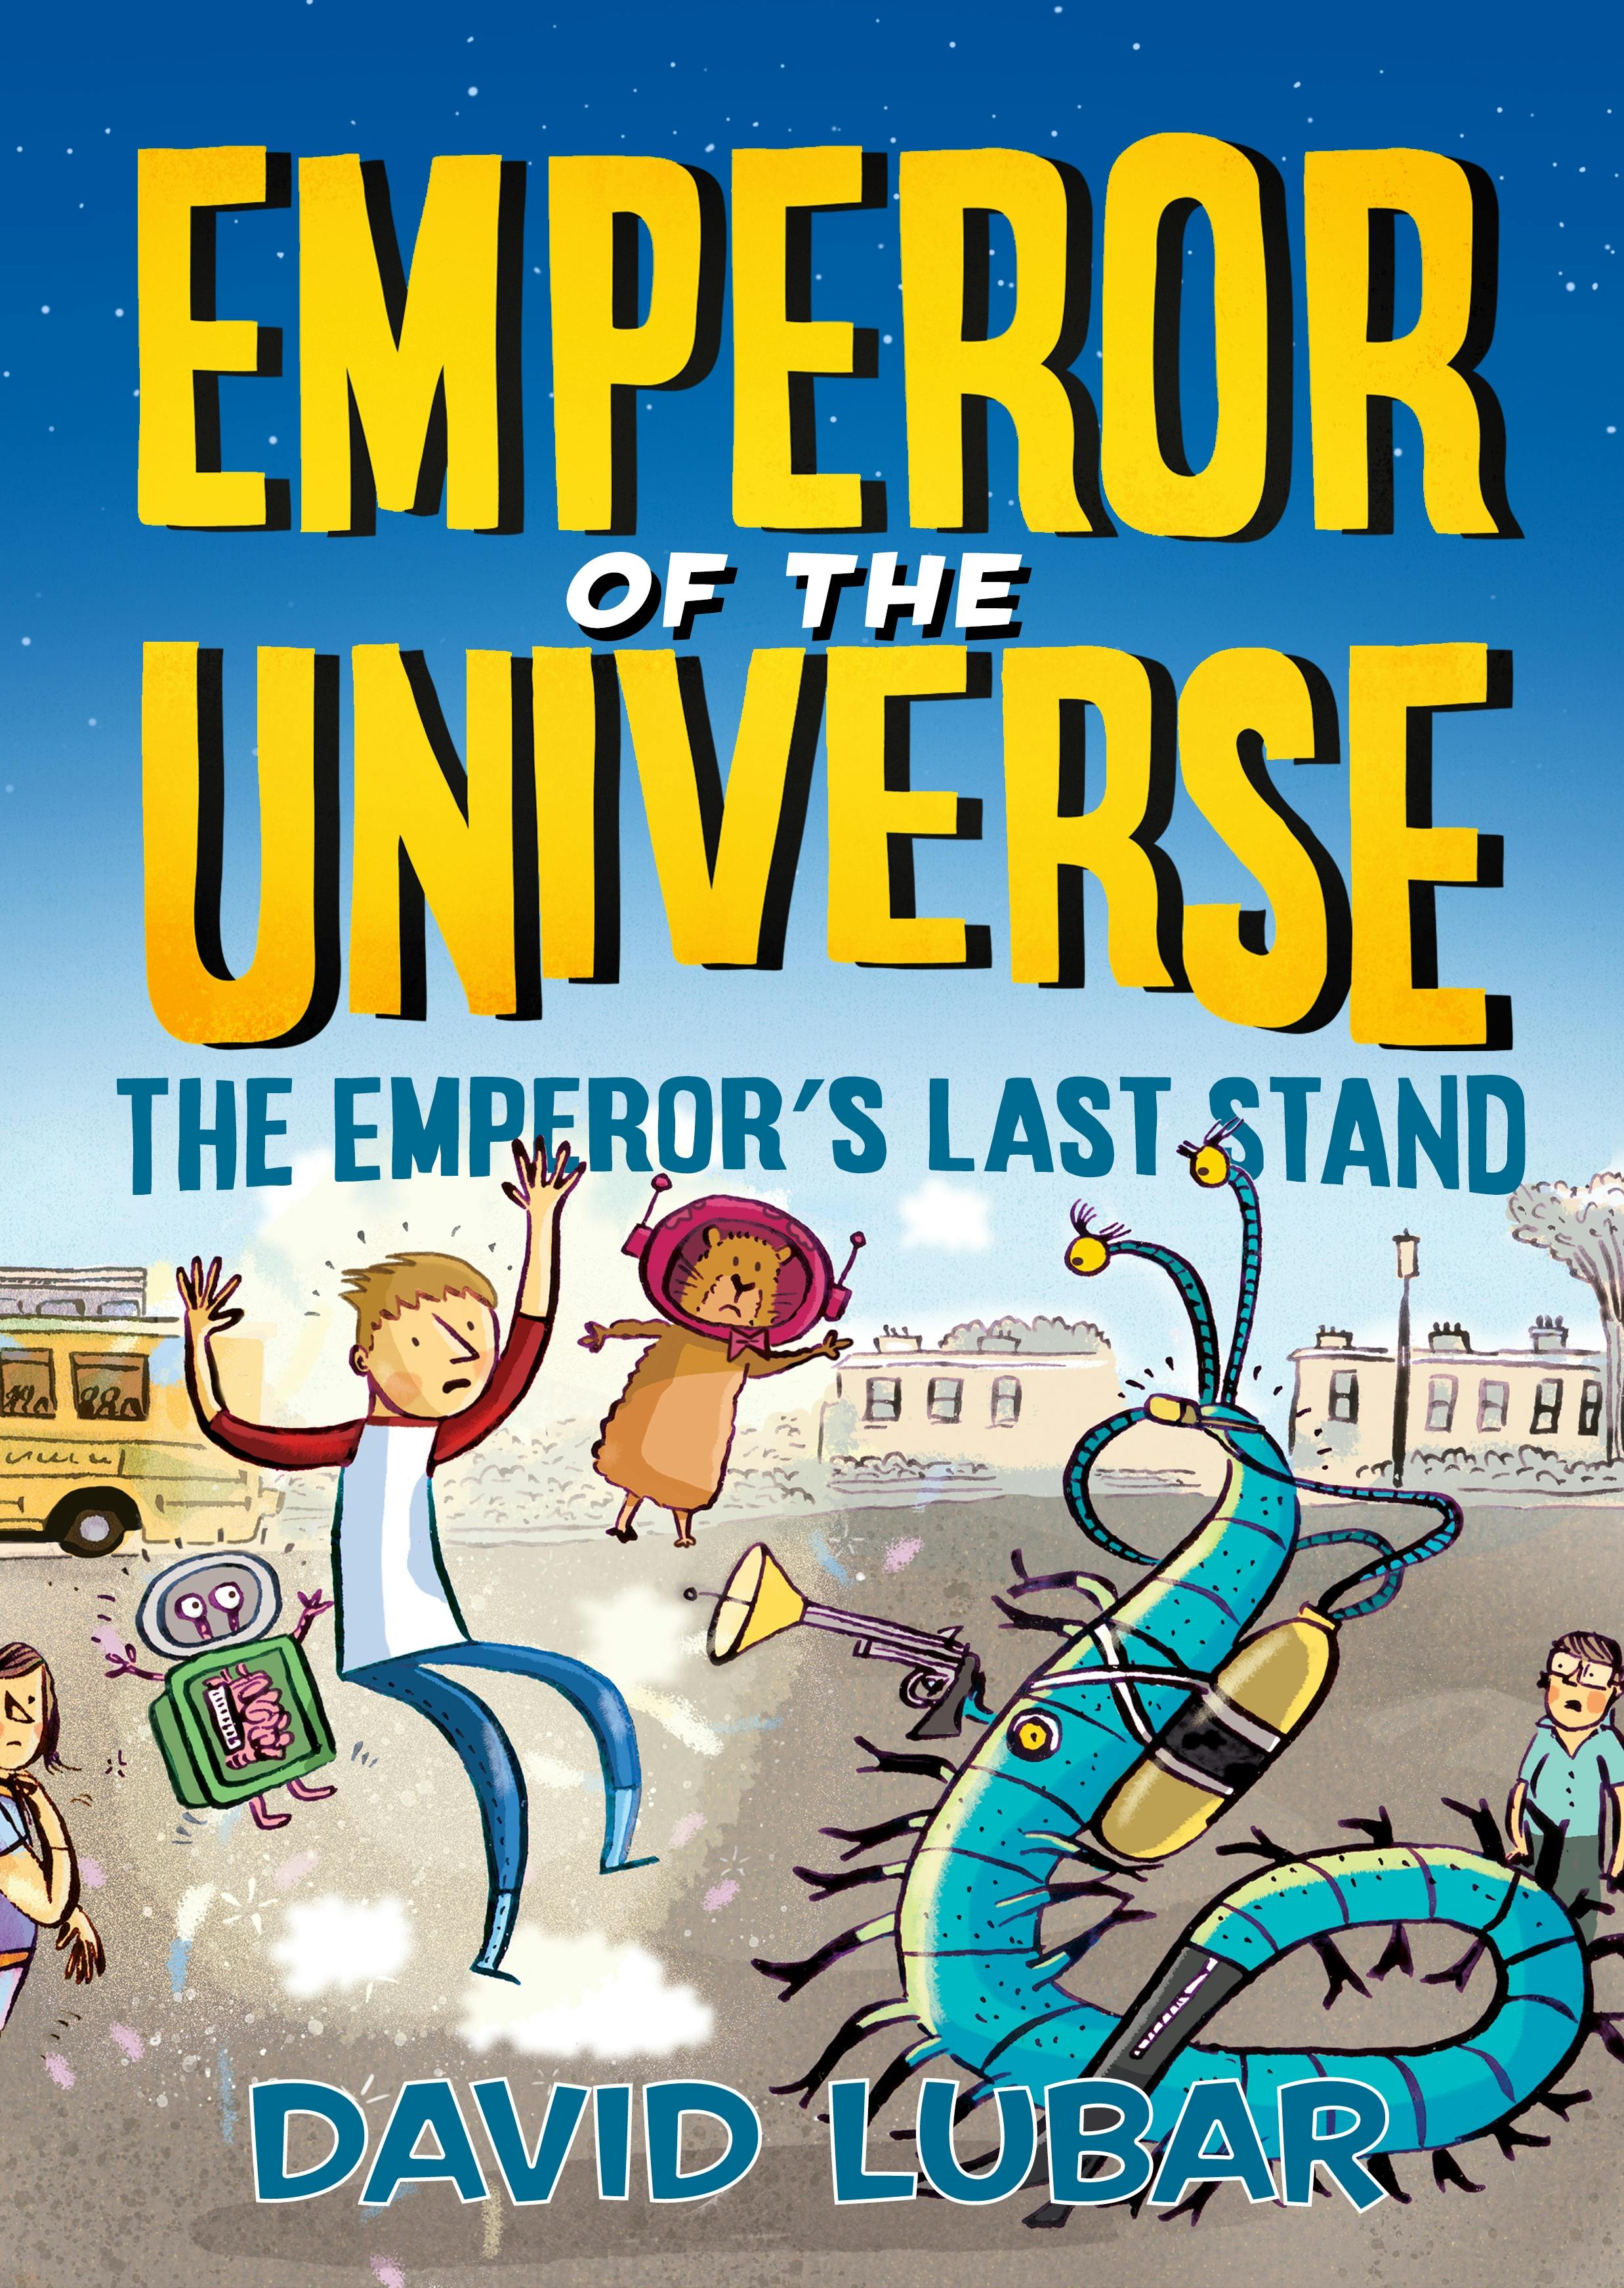 Cover for the book titled as: The Emperor's Last Stand